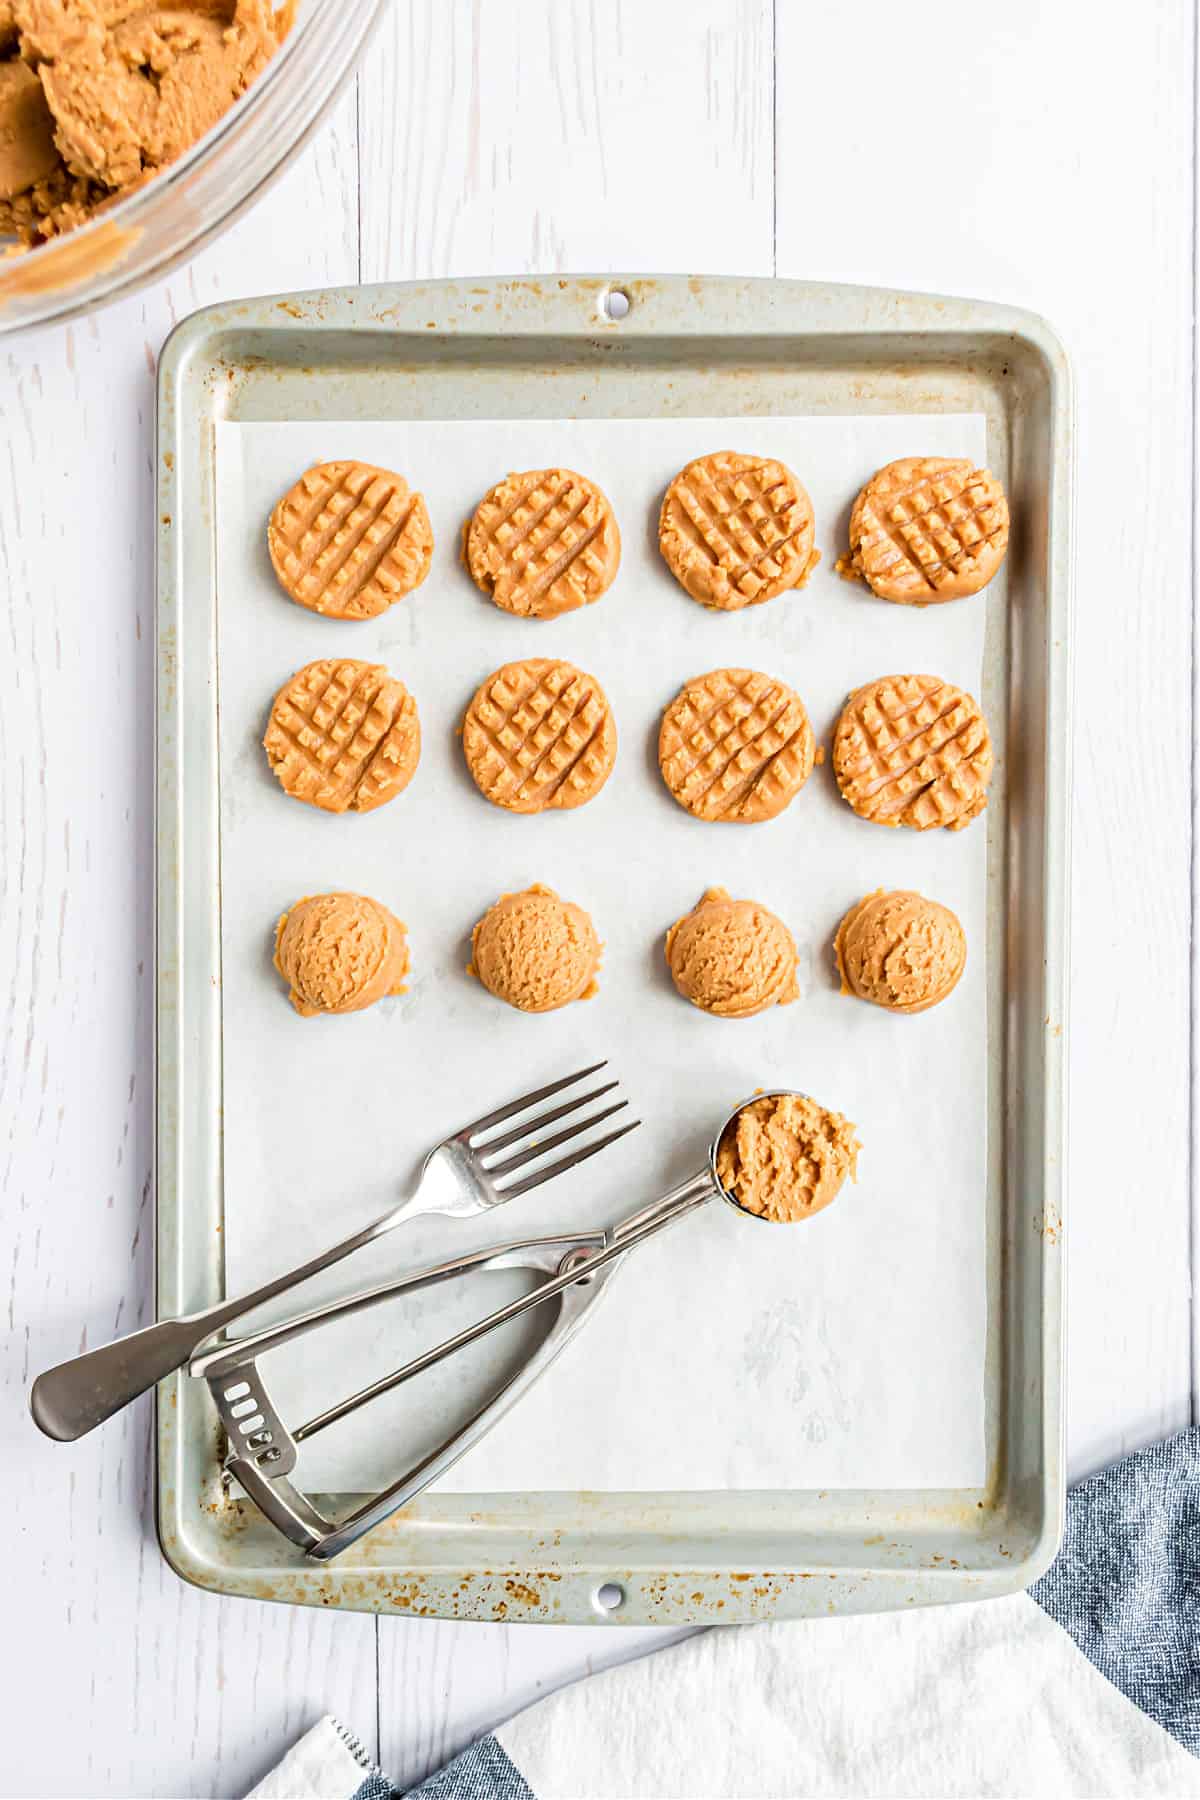 Peanut butter cookie dough on baking sheet for freezing.